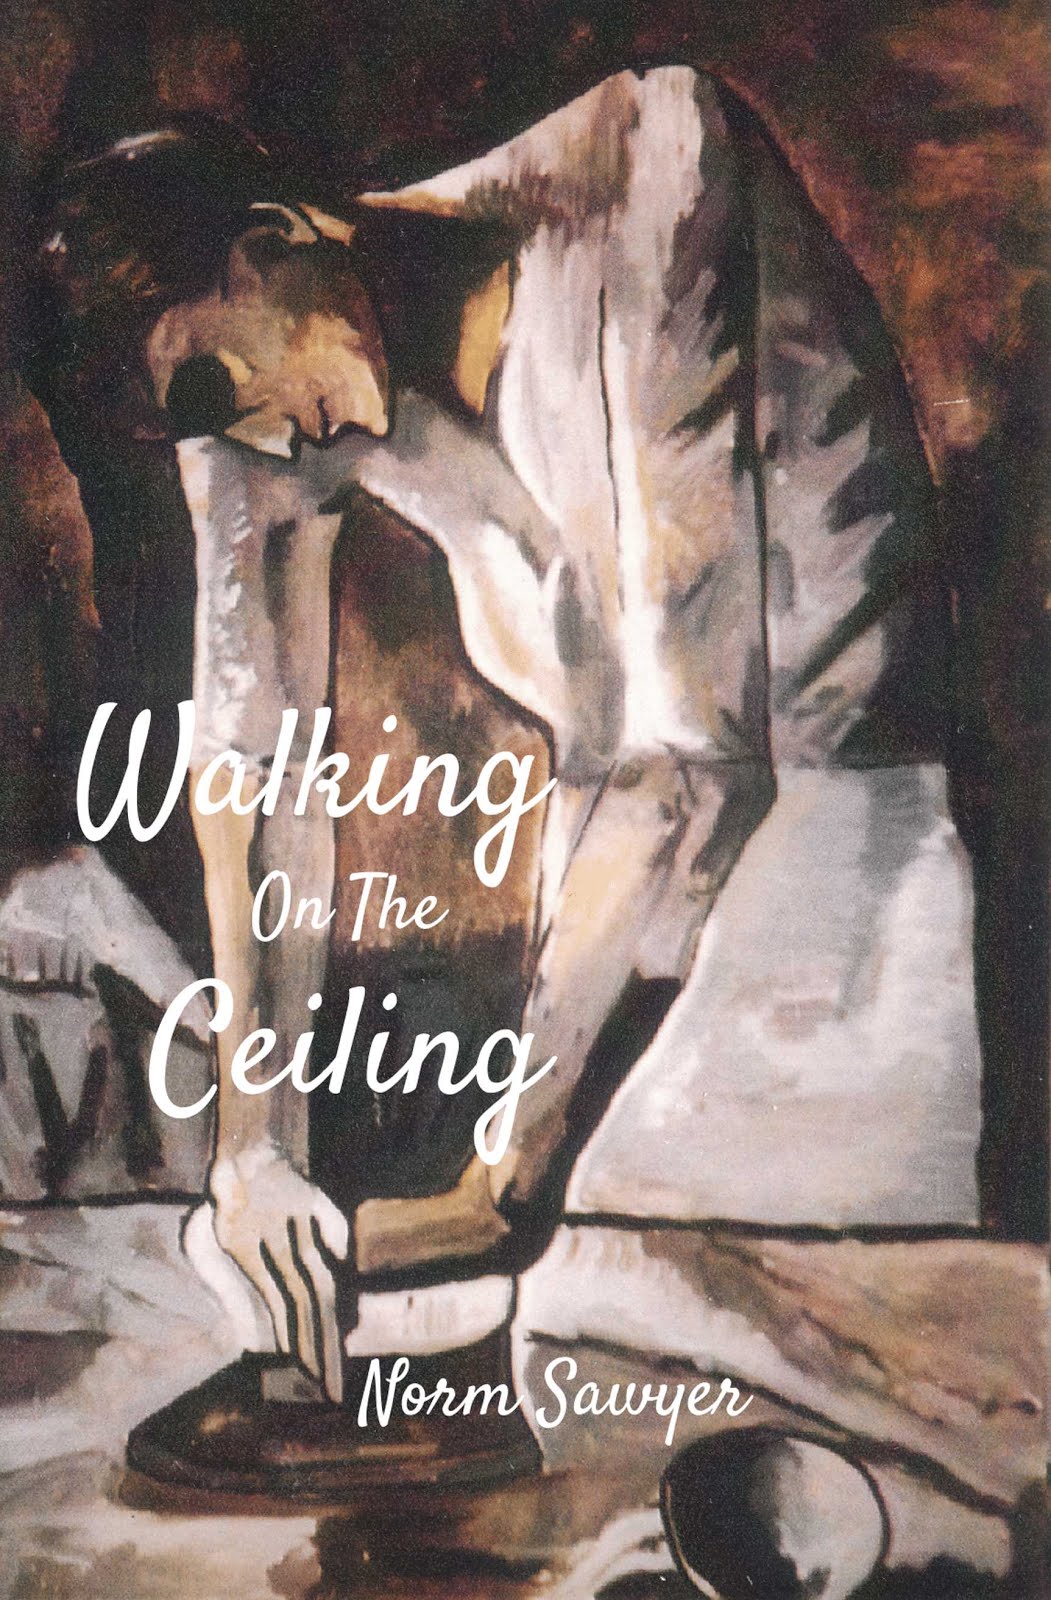 Walking On The Ceiling